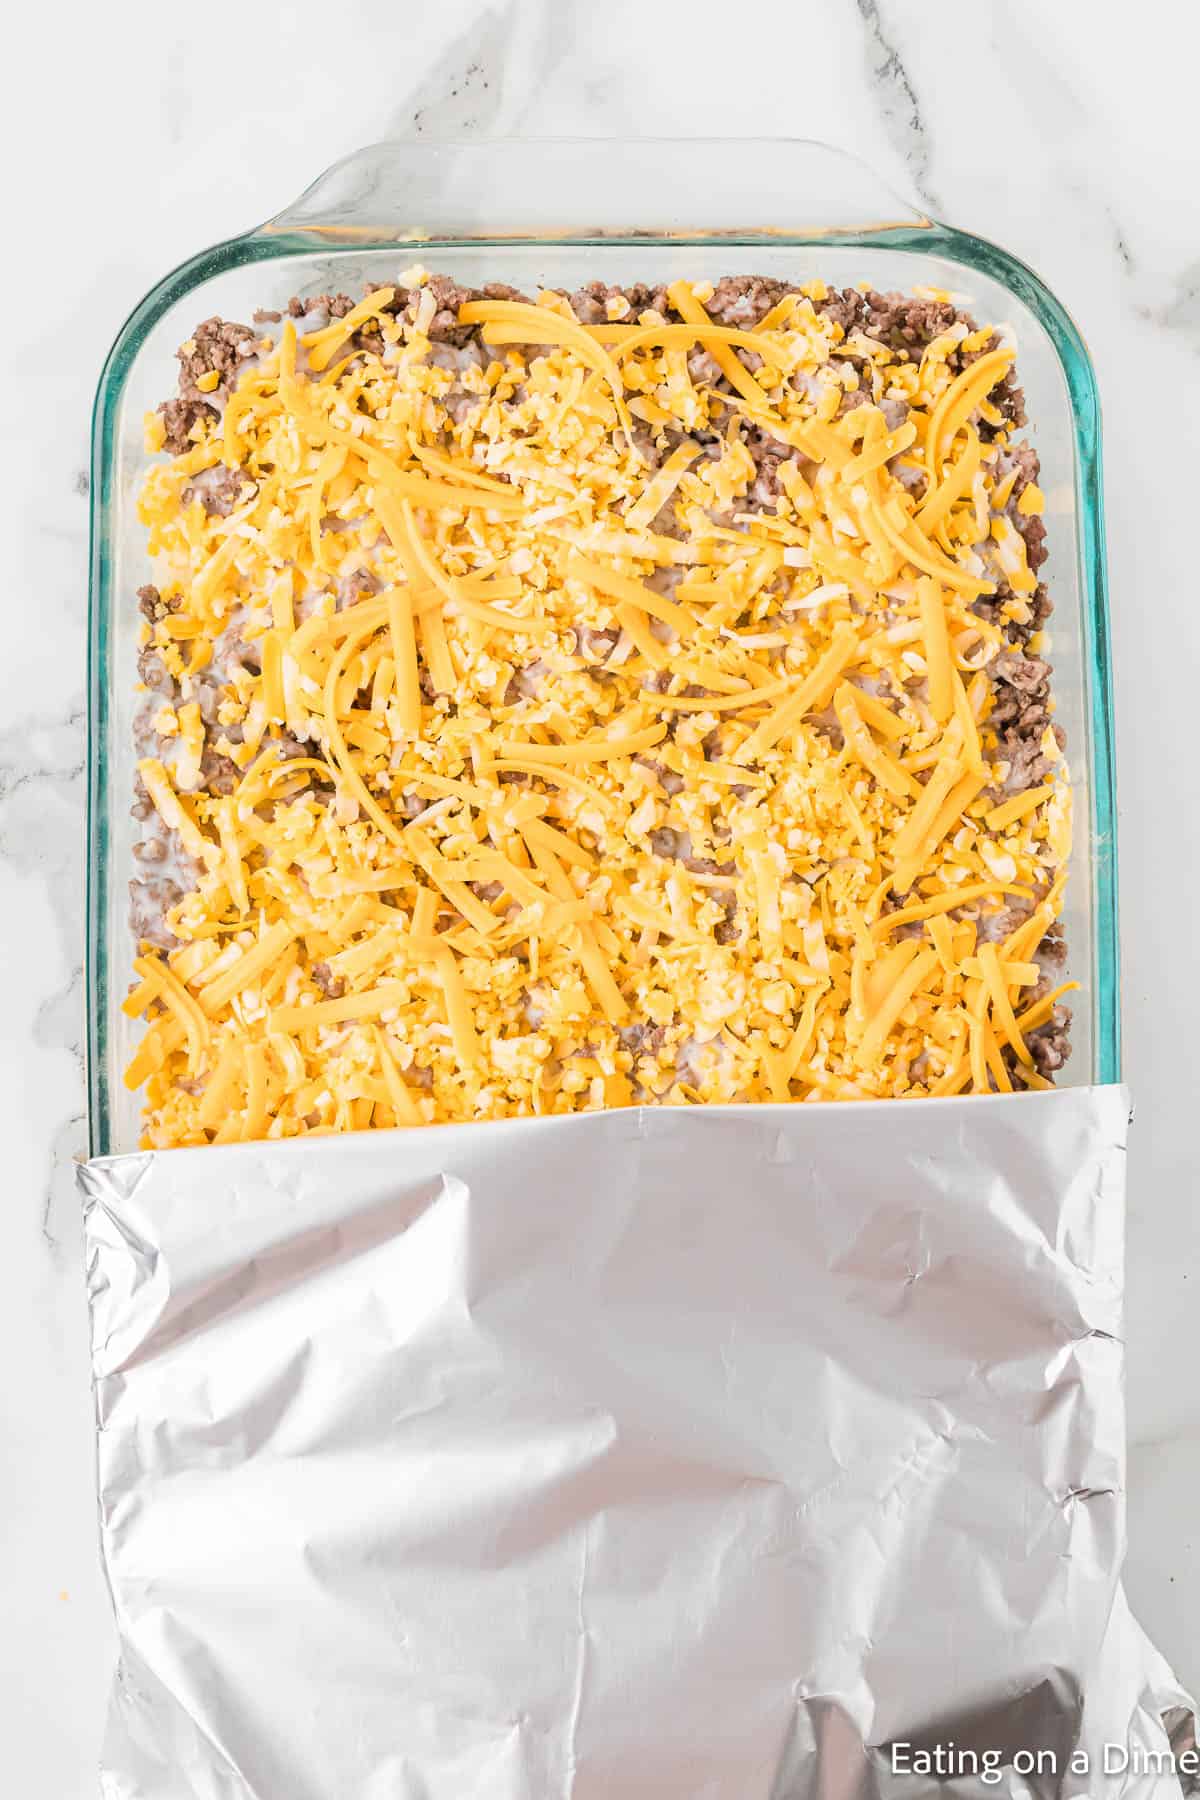 Covering the hamburger potato casserole with foil in a baking dish